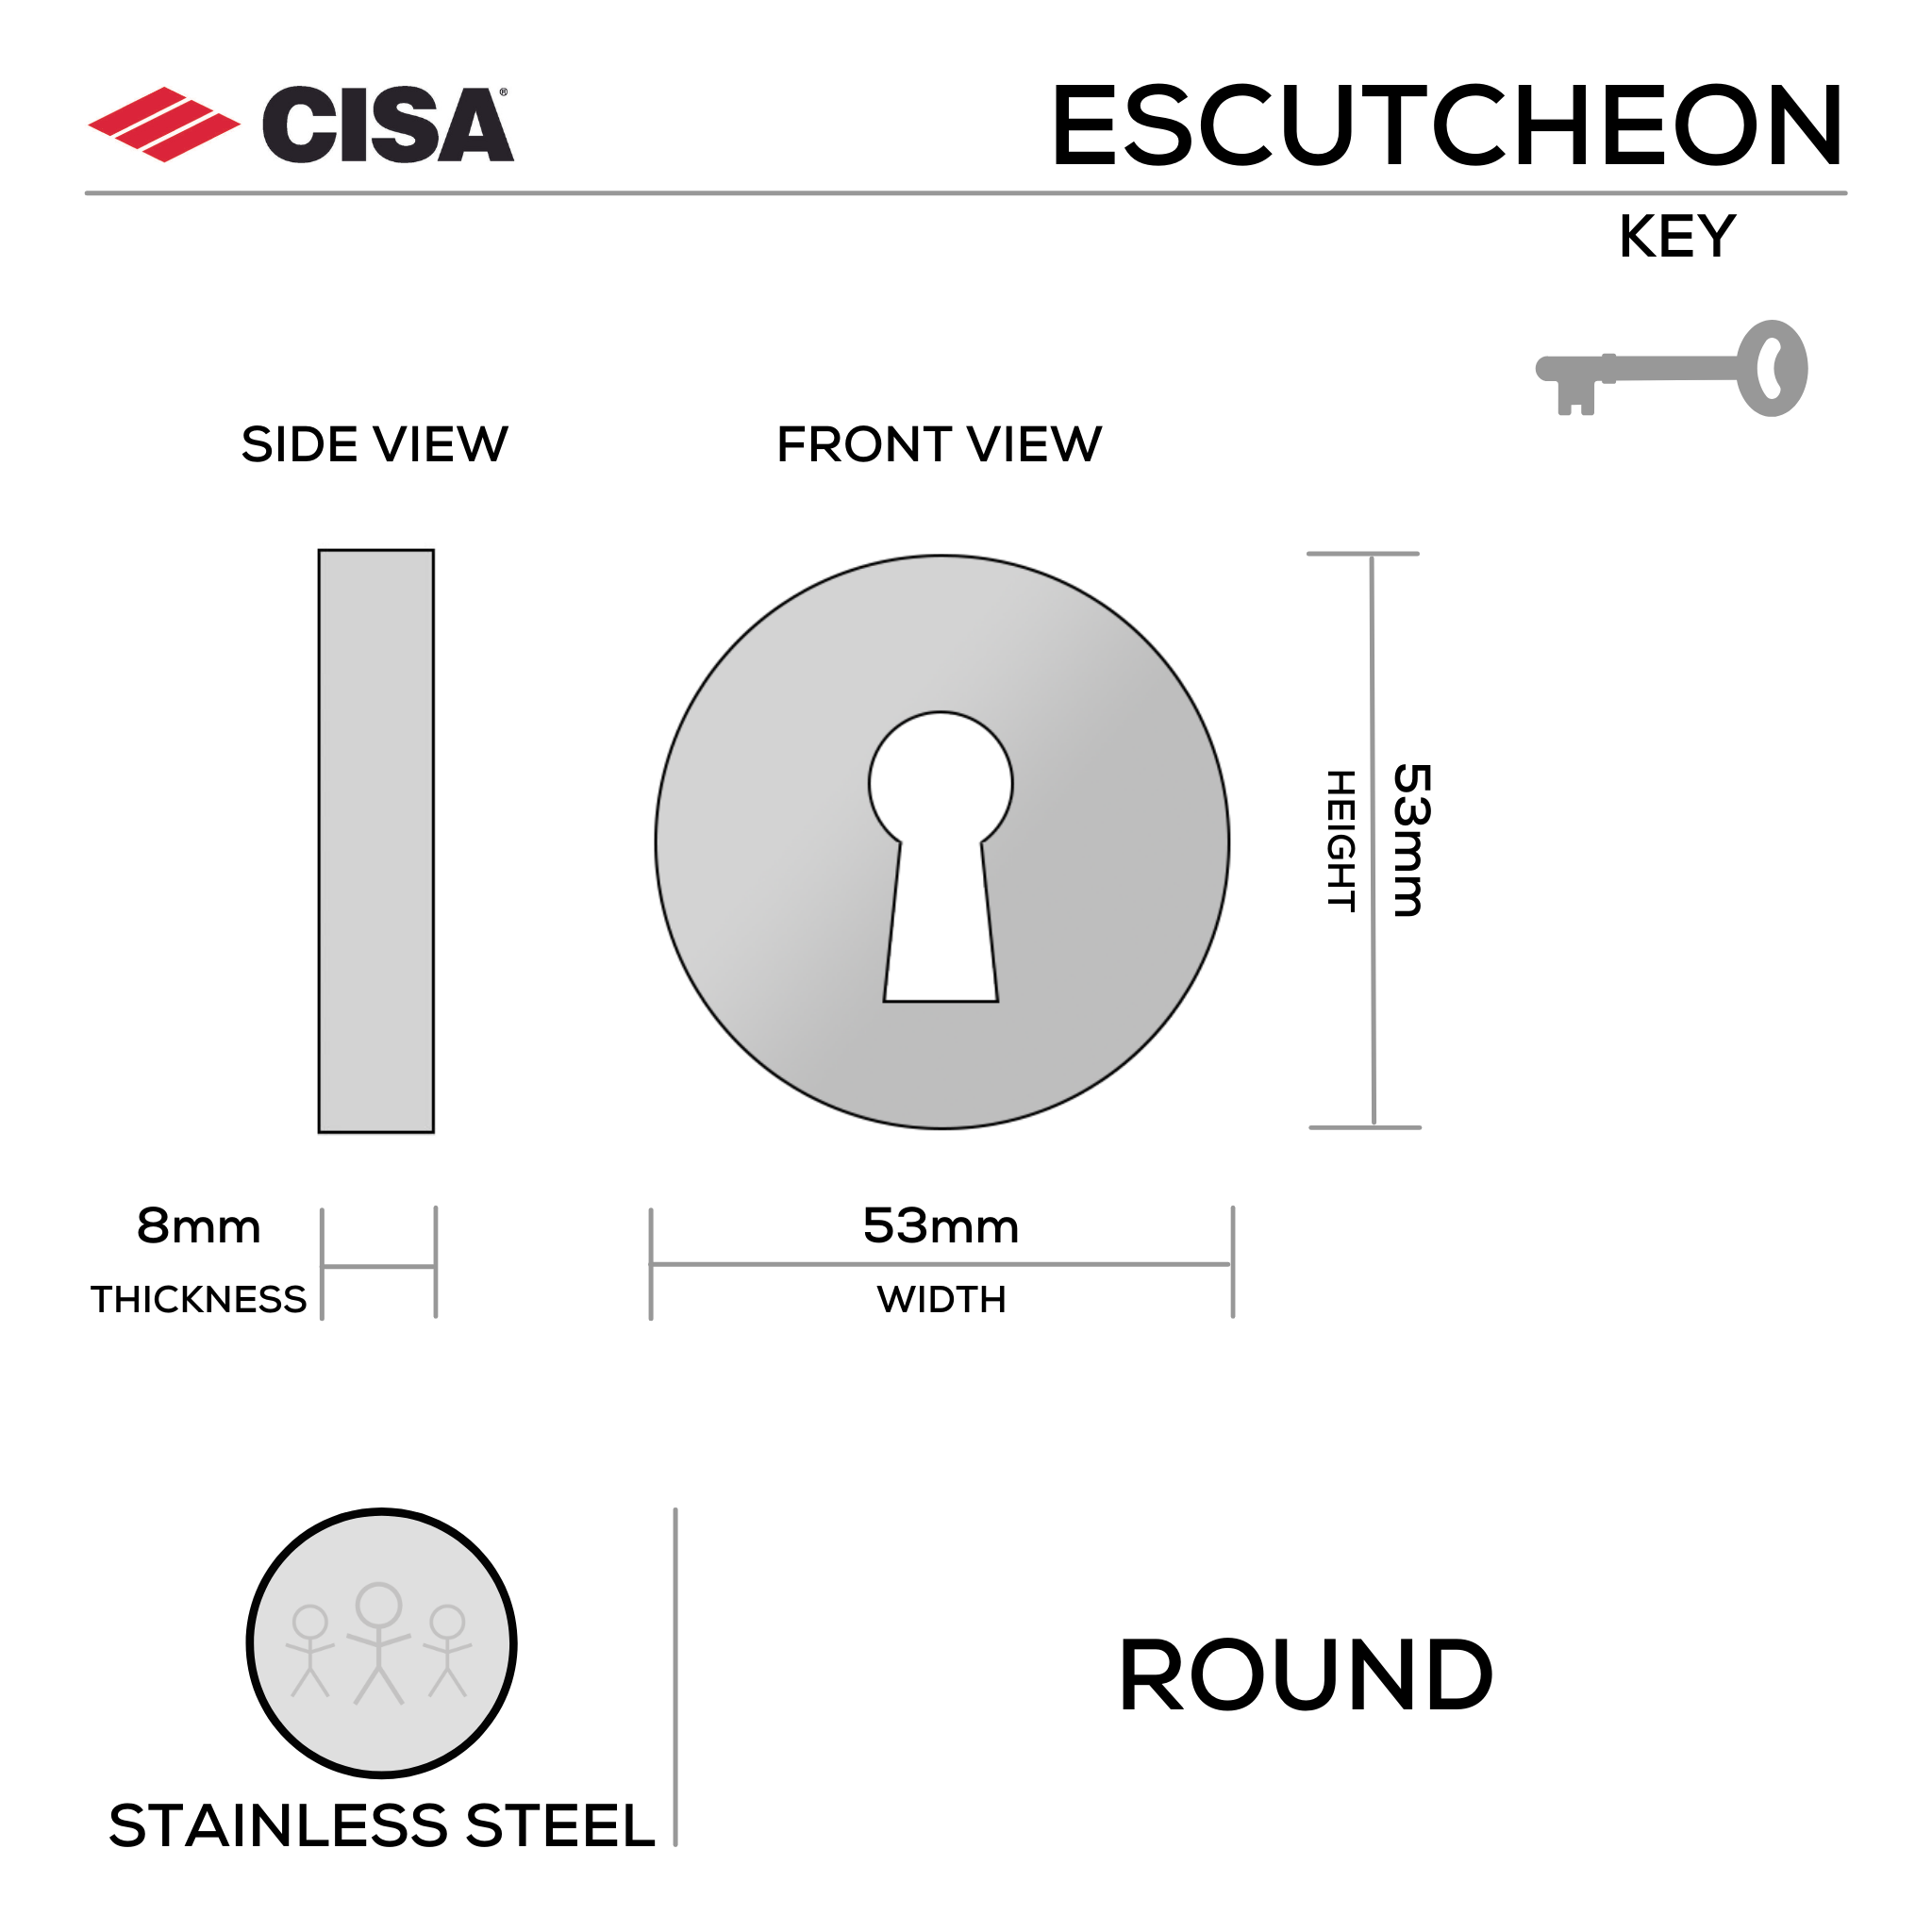 FE.R.K.SS, Keyhole Escutcheon, Round Rose, 53mm (h) x 53mm (w) x 8mm (t), Stainless Steel, CISA